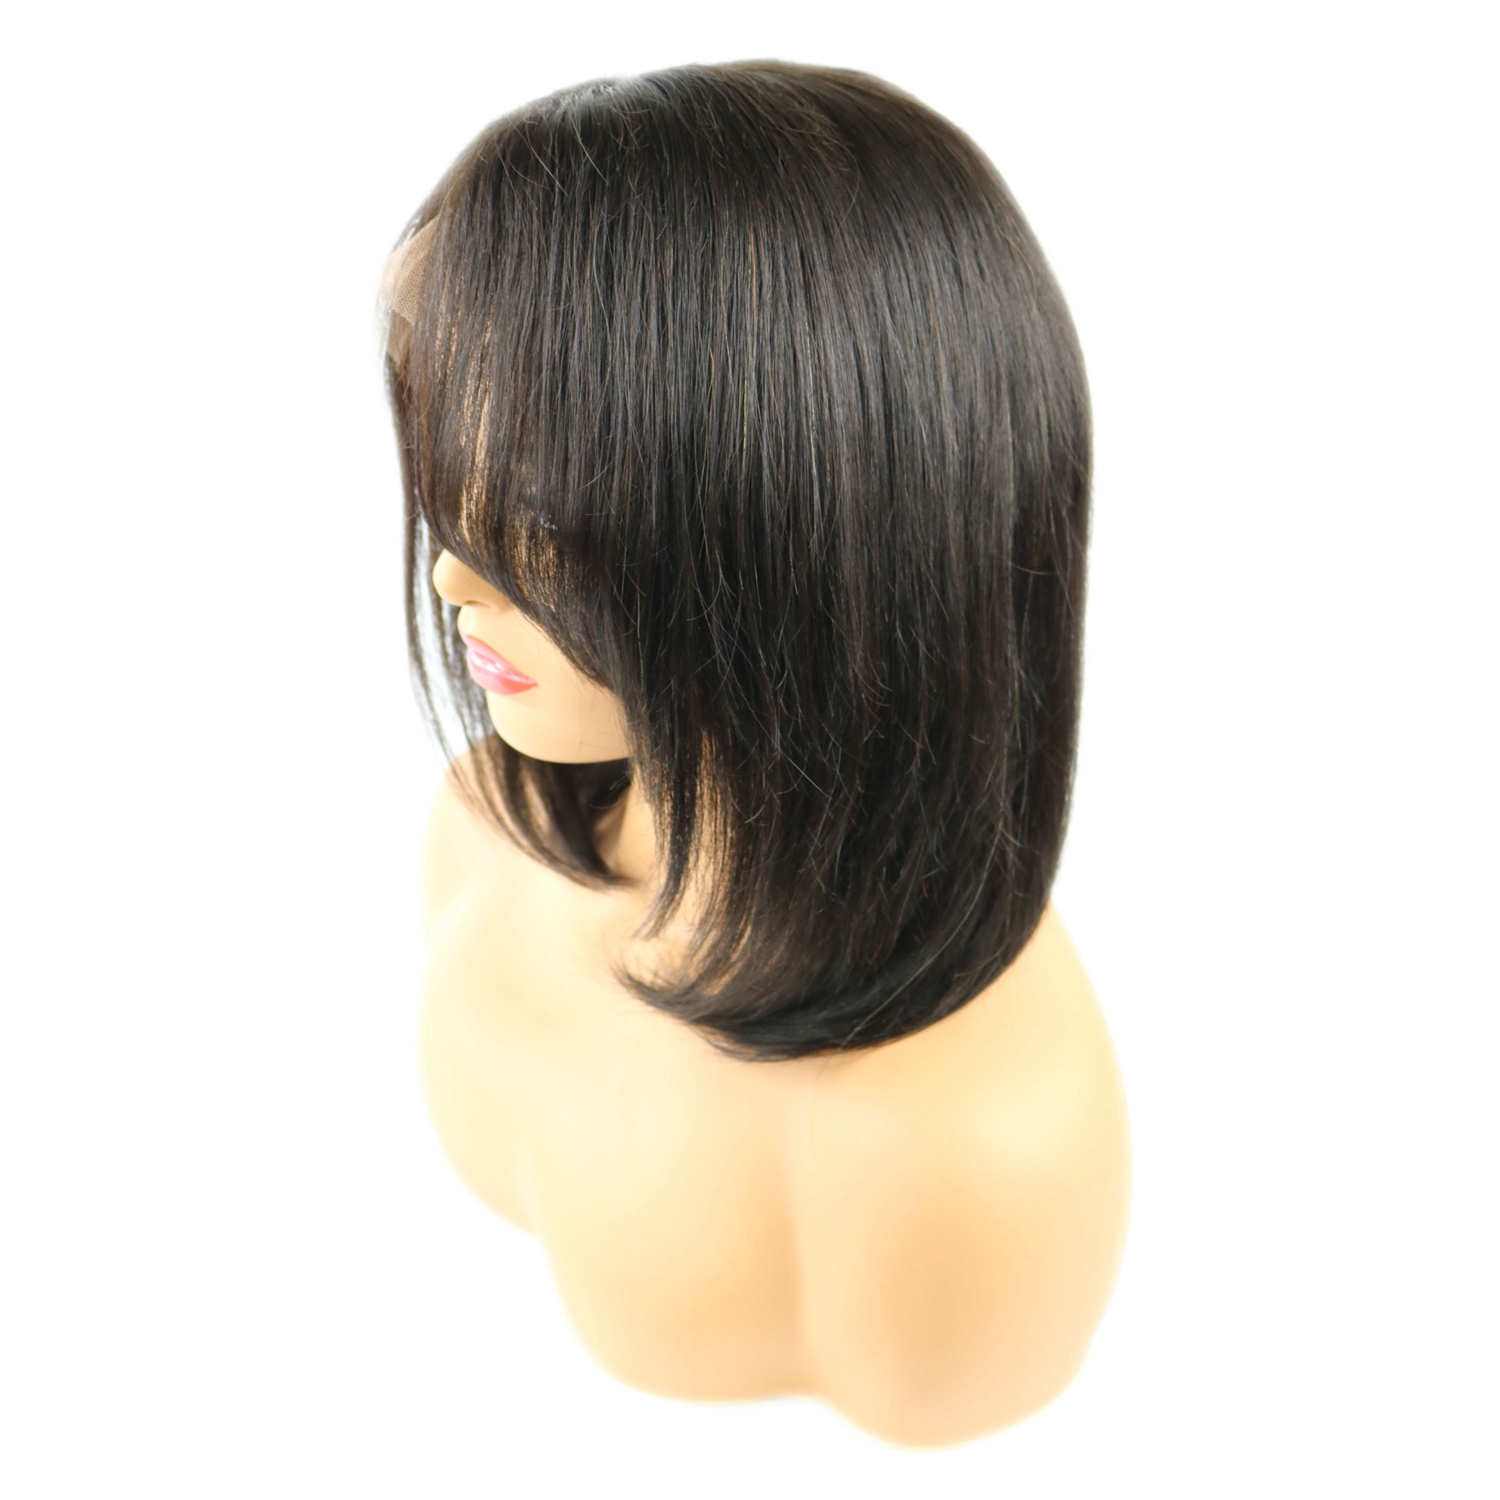 Lace Front Cap Human Hair Straight 120% 12 Inches Wigs